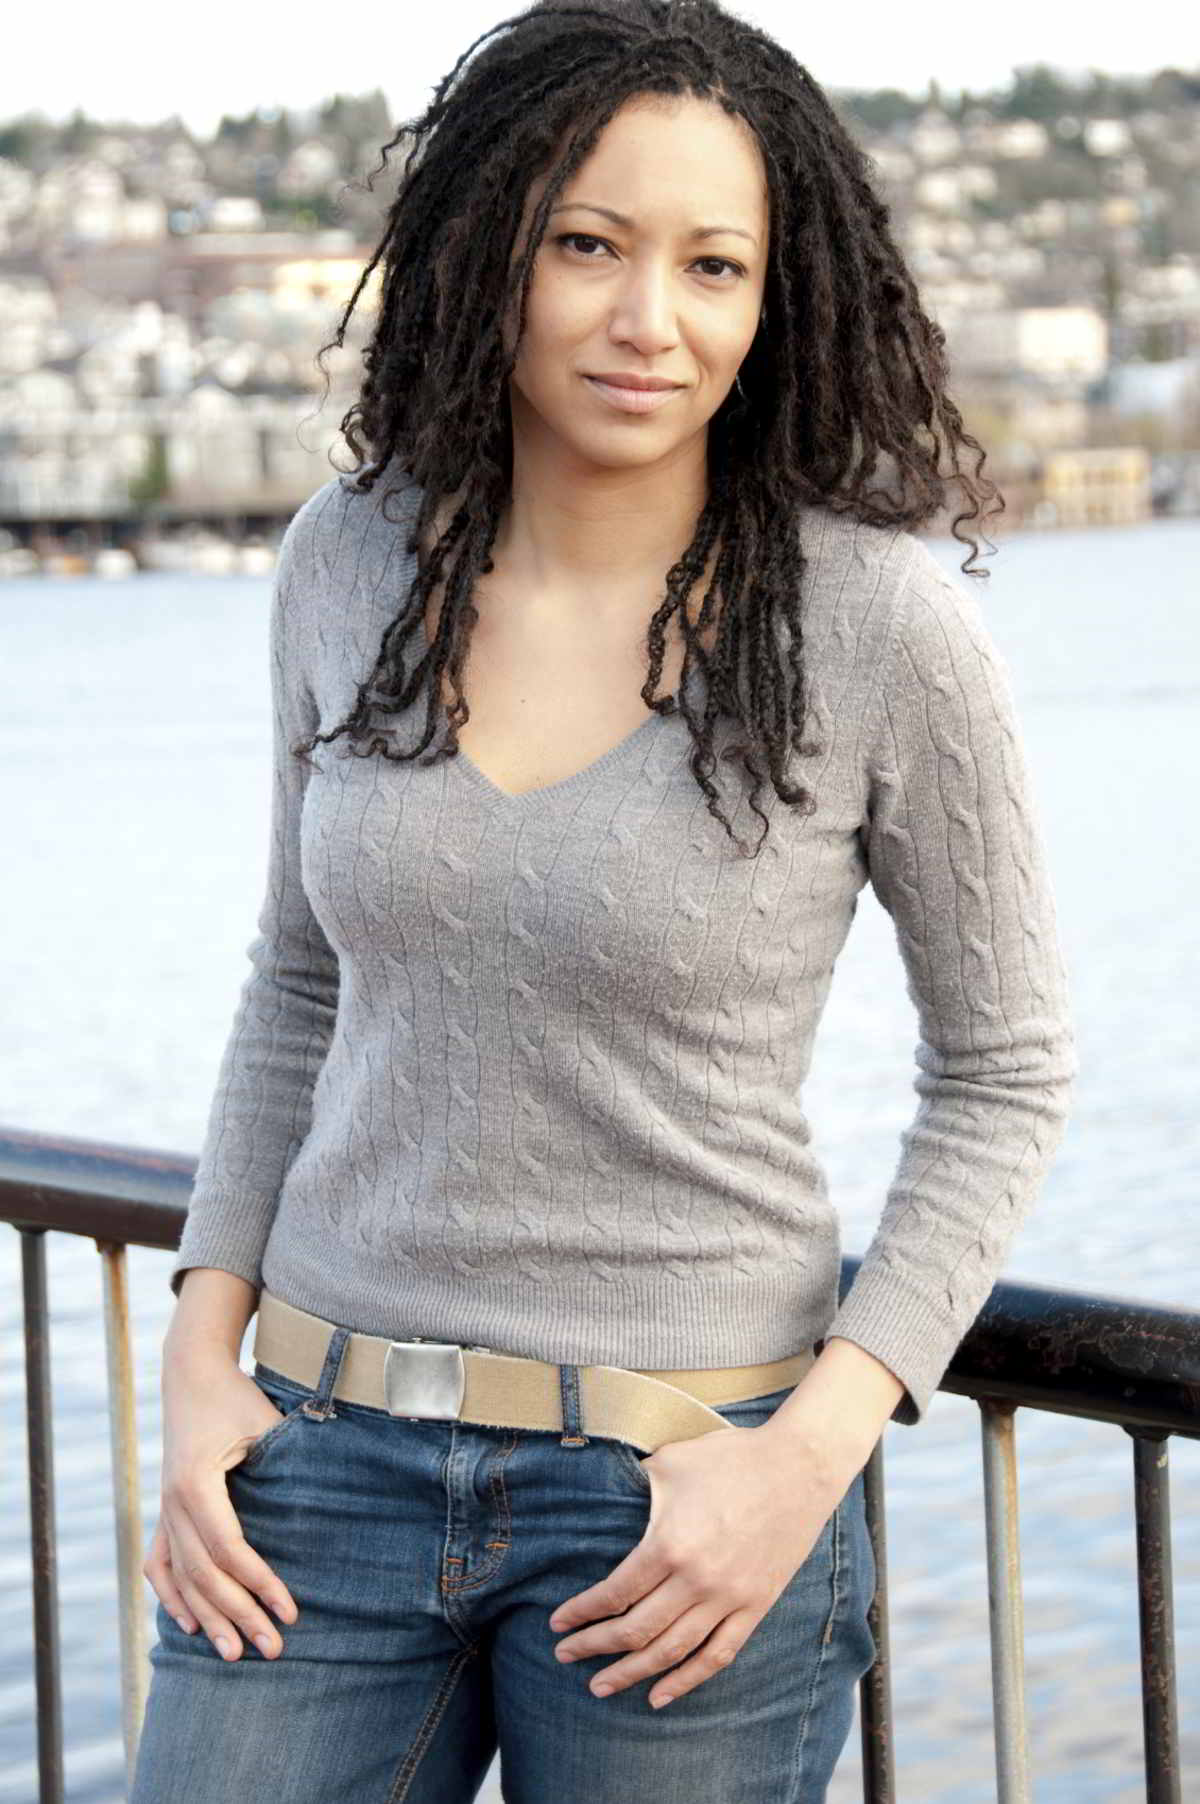 Dreadlock Styles For Women That Look Oh So Very Cool